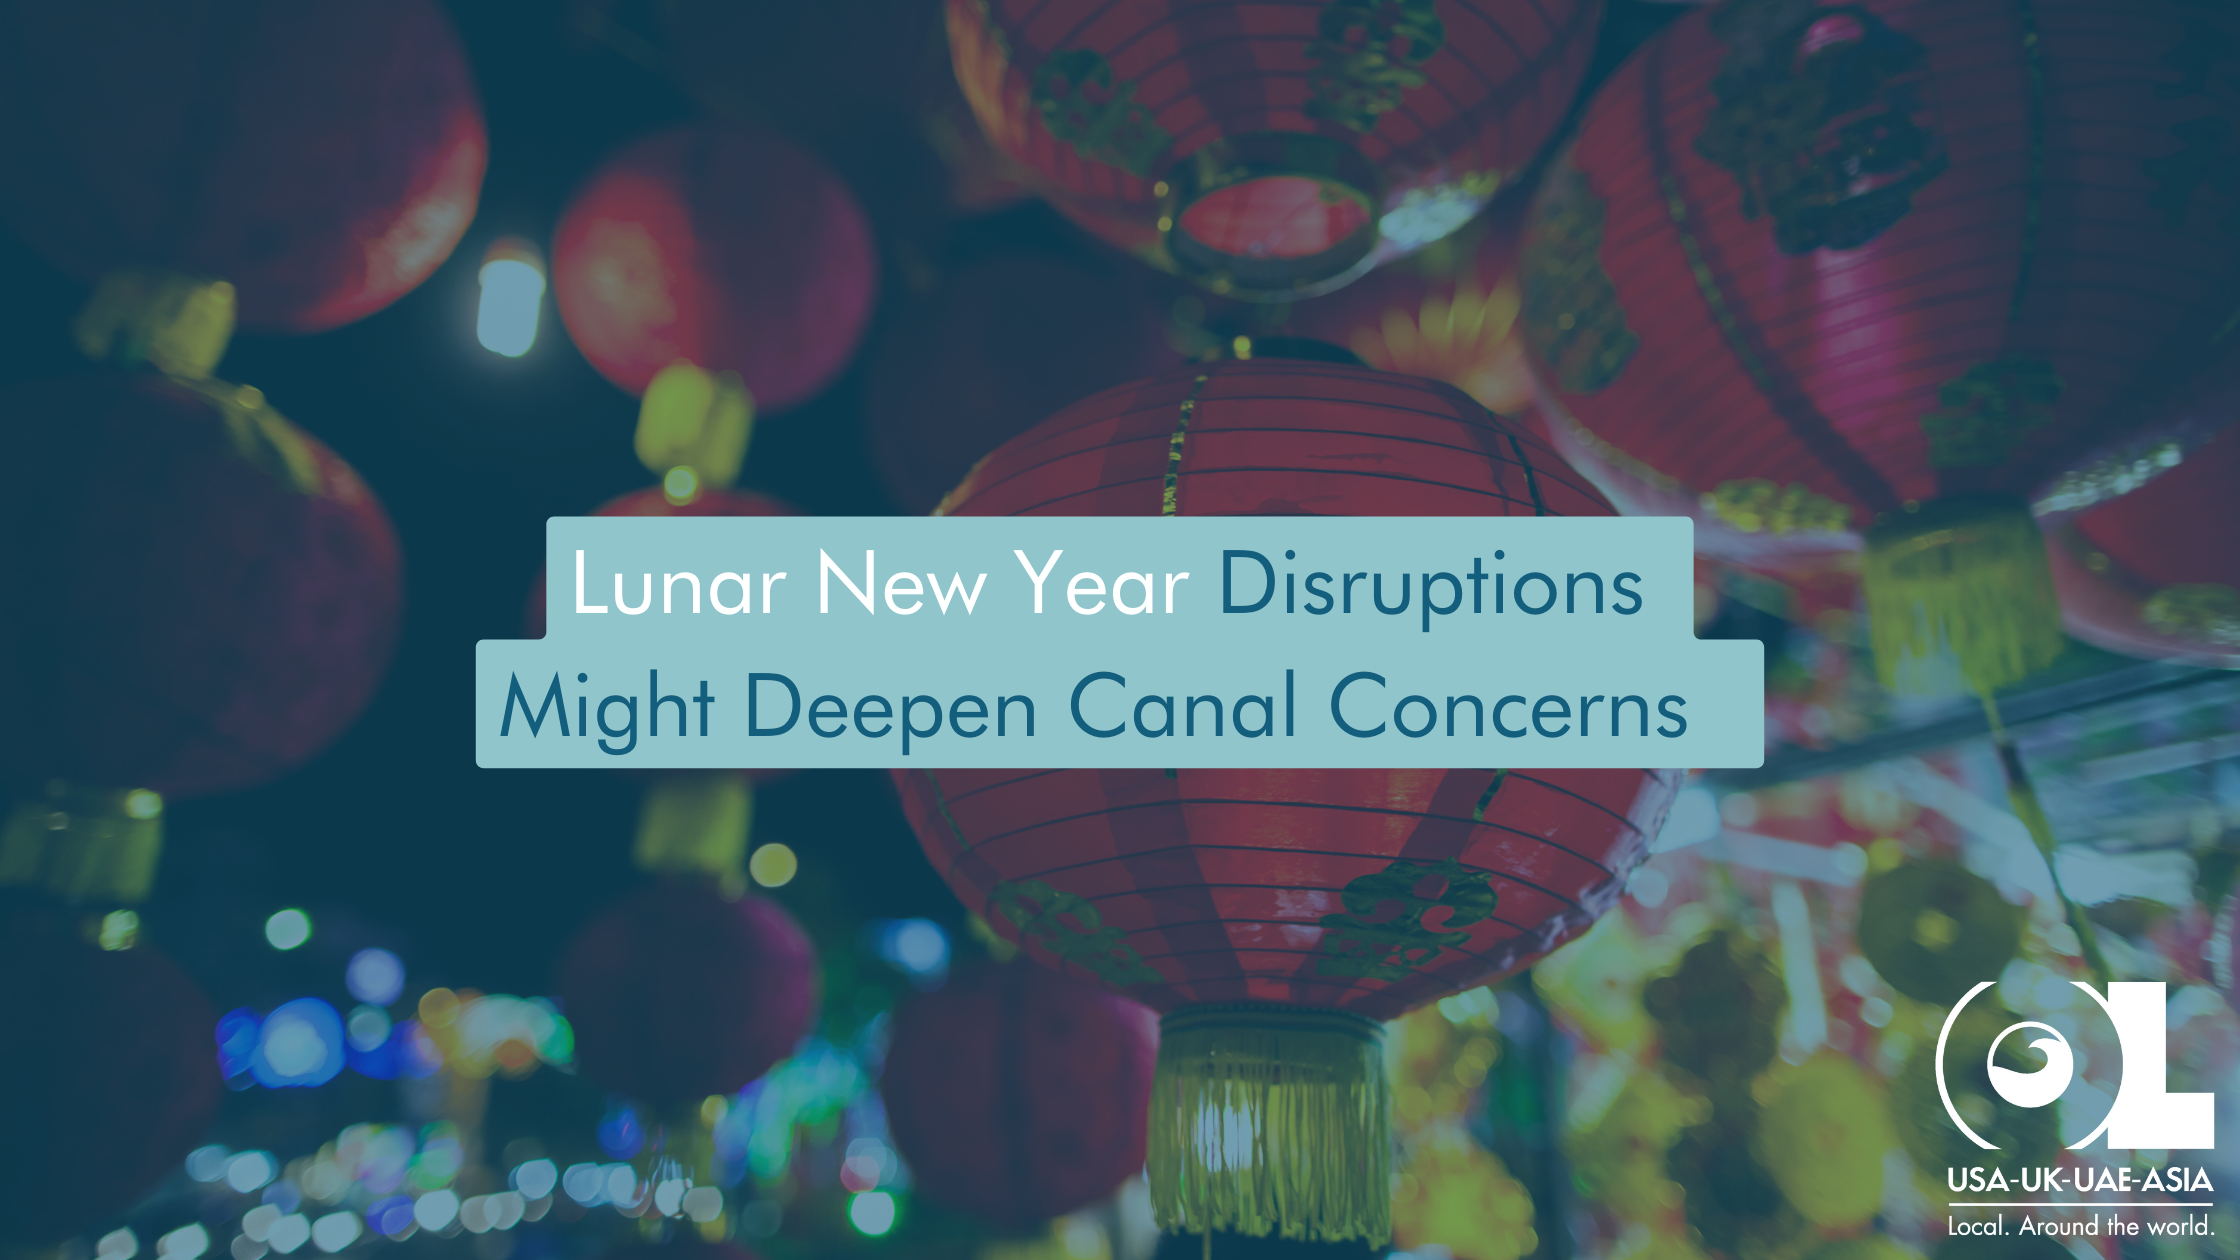 Lunar-New-Year-disruptions-might-deepen-canal-concerns-OL-USA